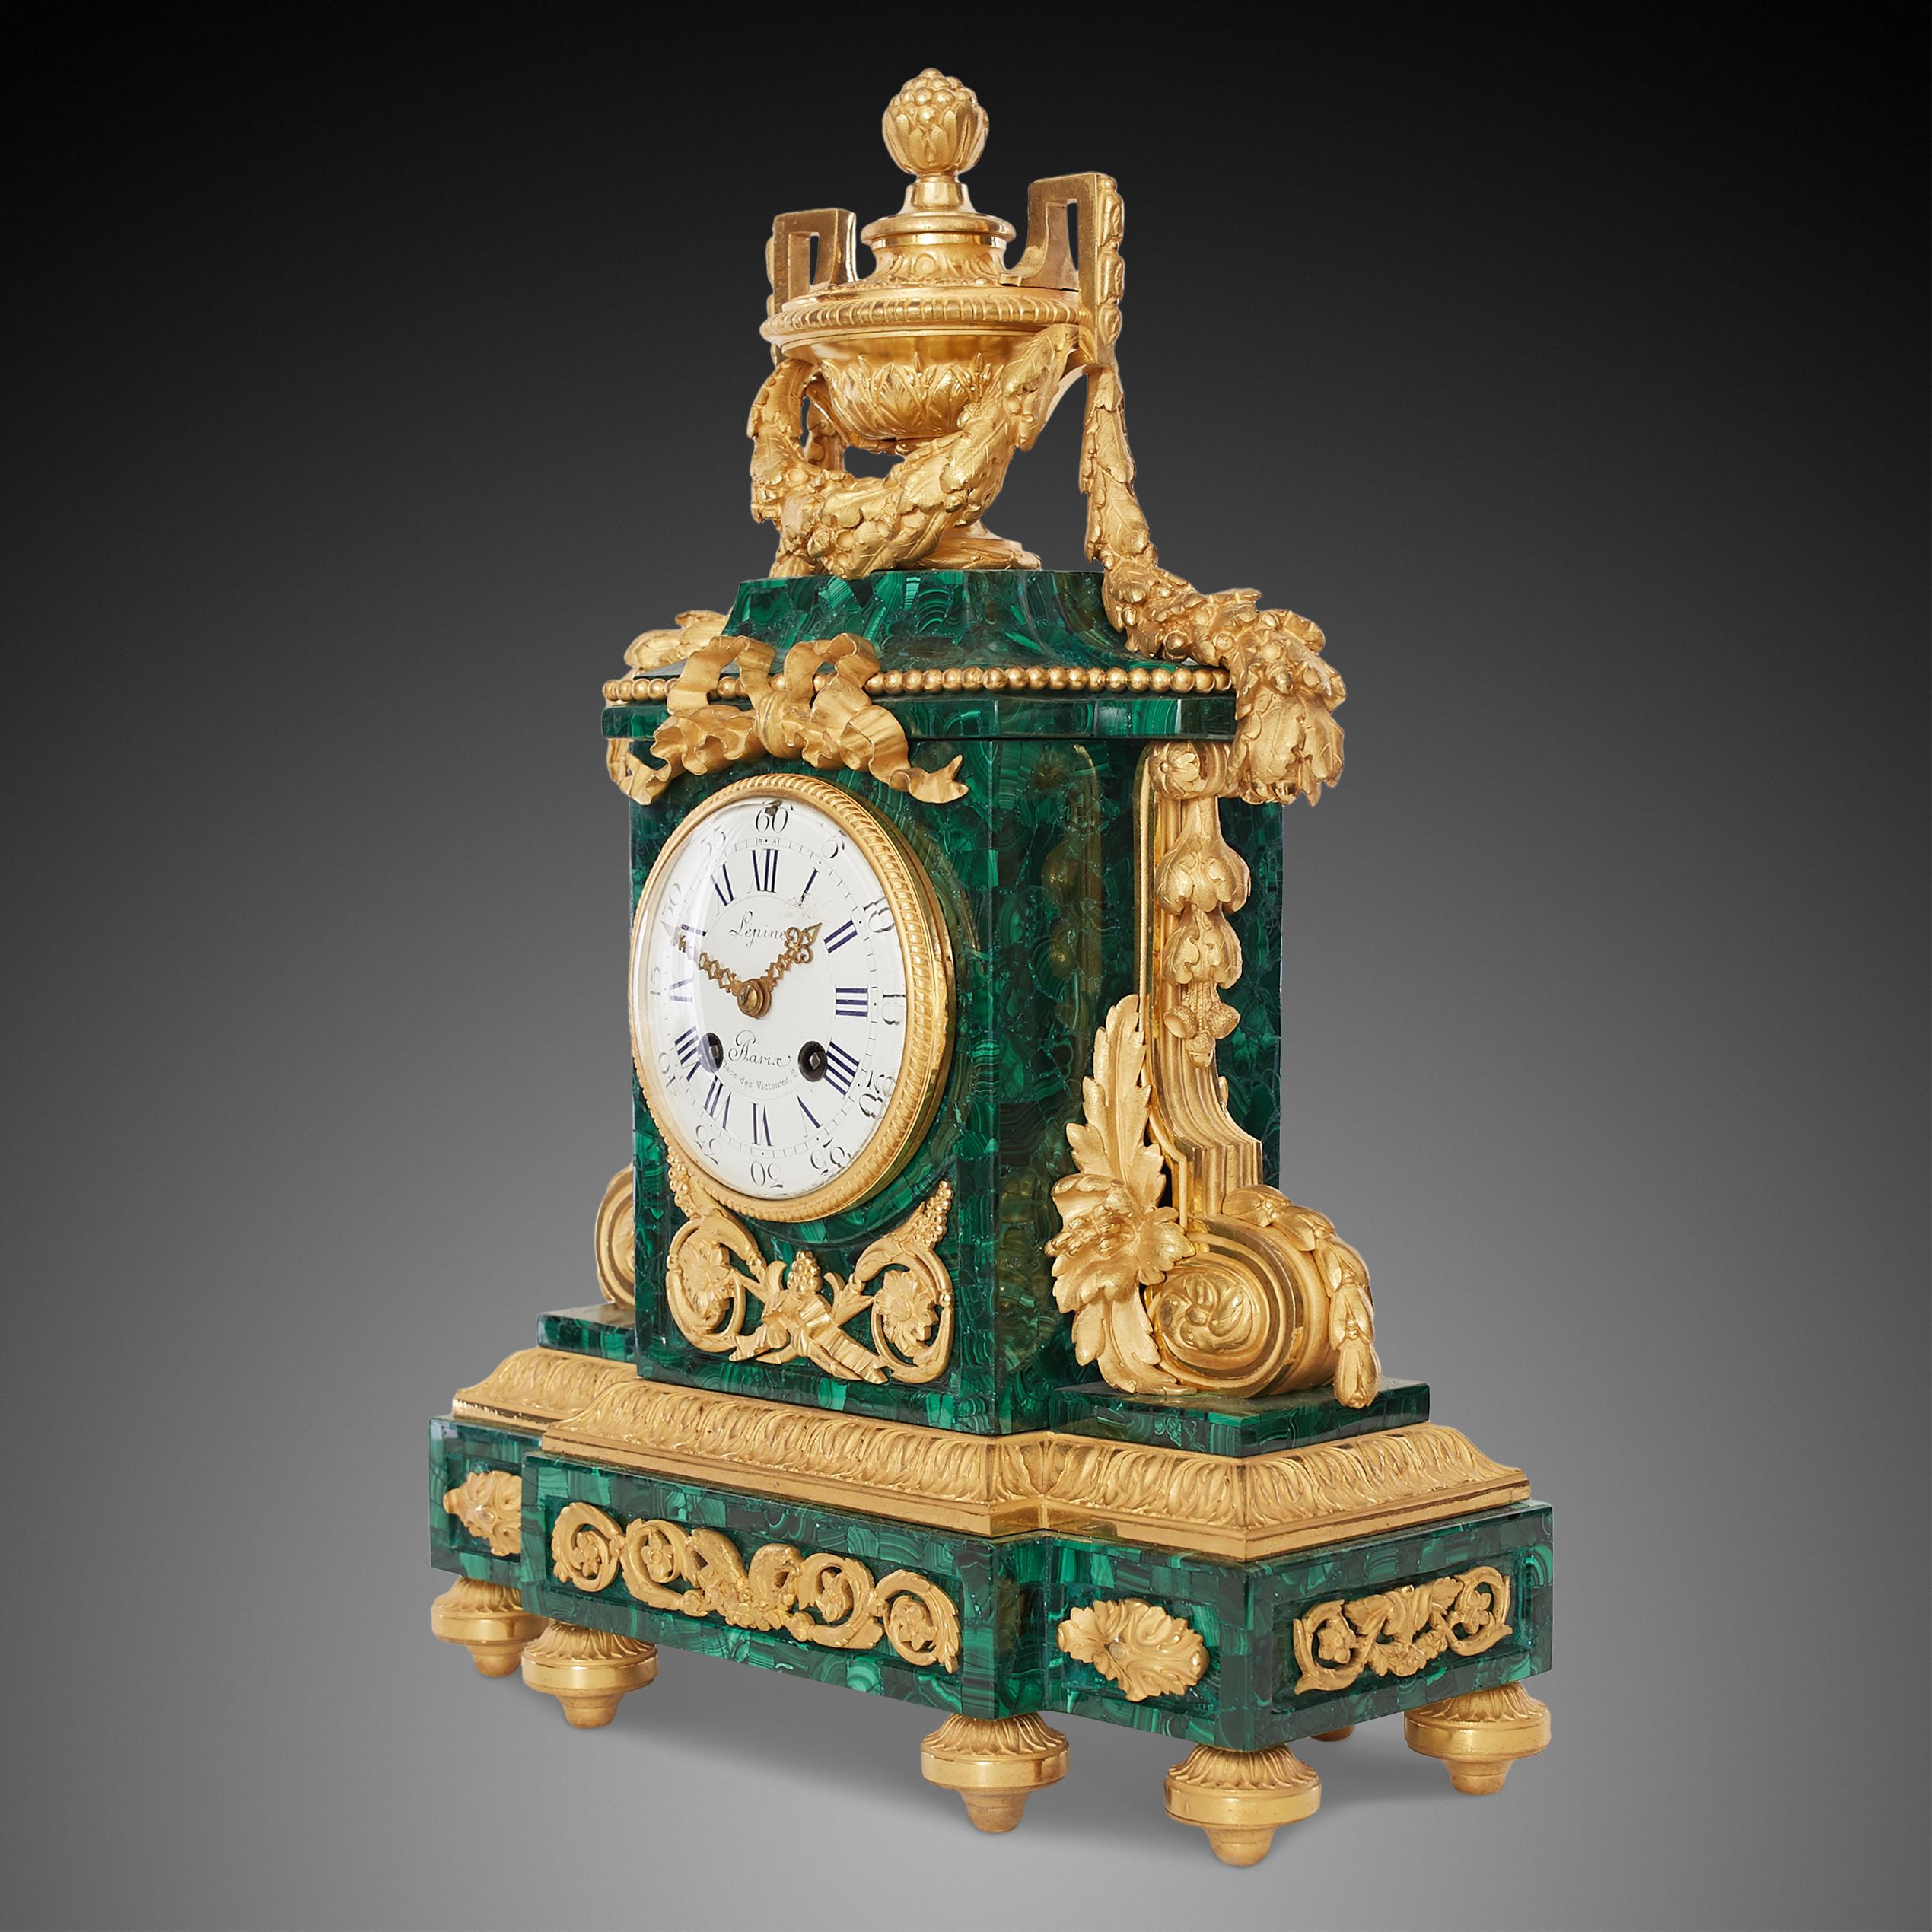 This three-piece clock set consists of a mantel clock and a pair of beautiful malachite candelabra in an ornamental Louis XVI style.

The mantel clock in bronze and malachite in the center has an enamel dial with Roman numerals. The whole is